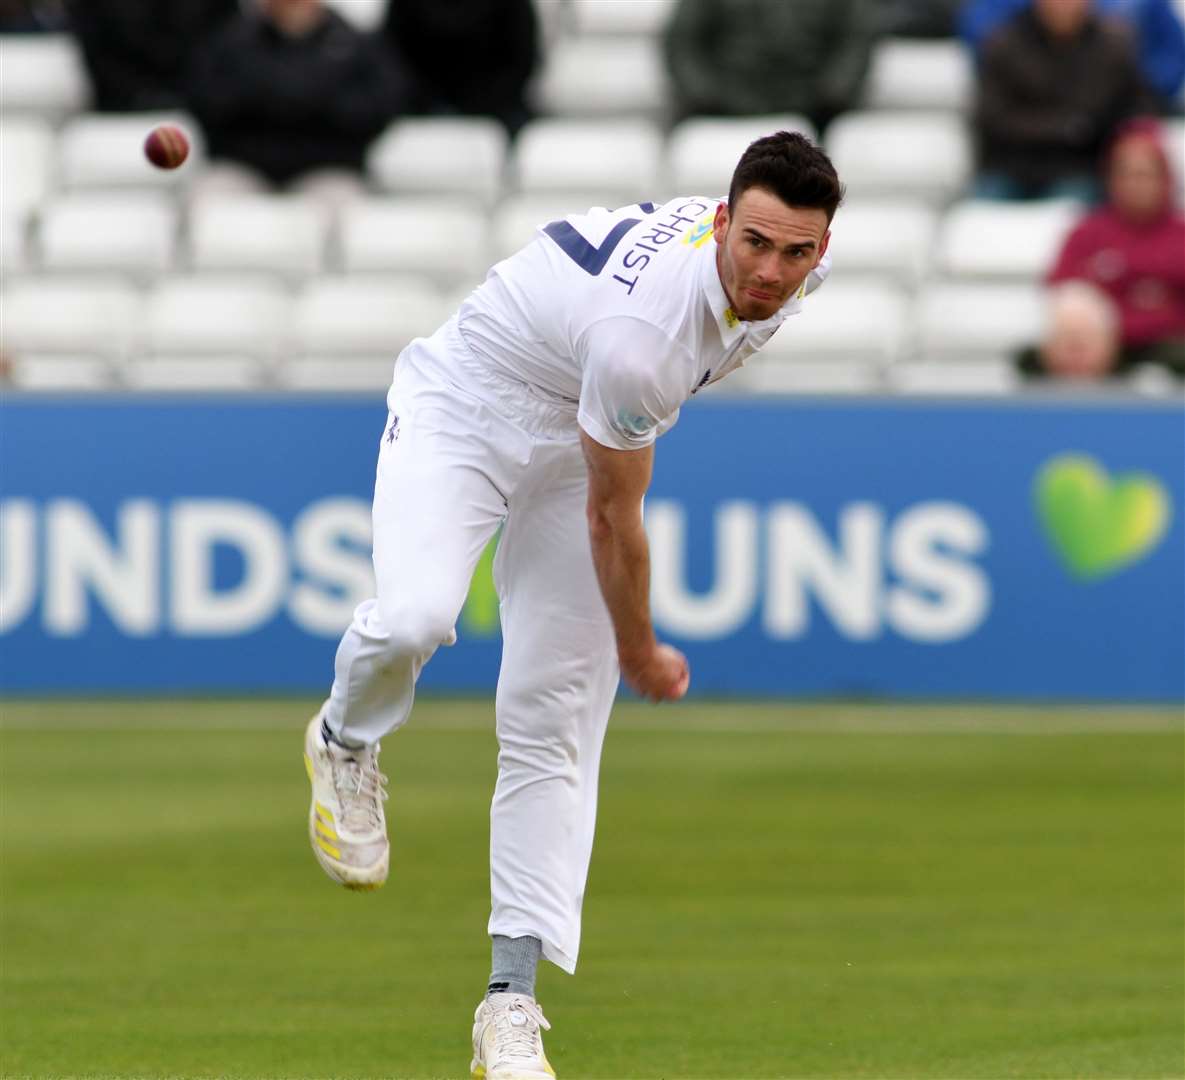 Nathan Gilchrist took 3-71 - including the wicket of Hampshire centurion James Vince. Picture: Barry Goodwin